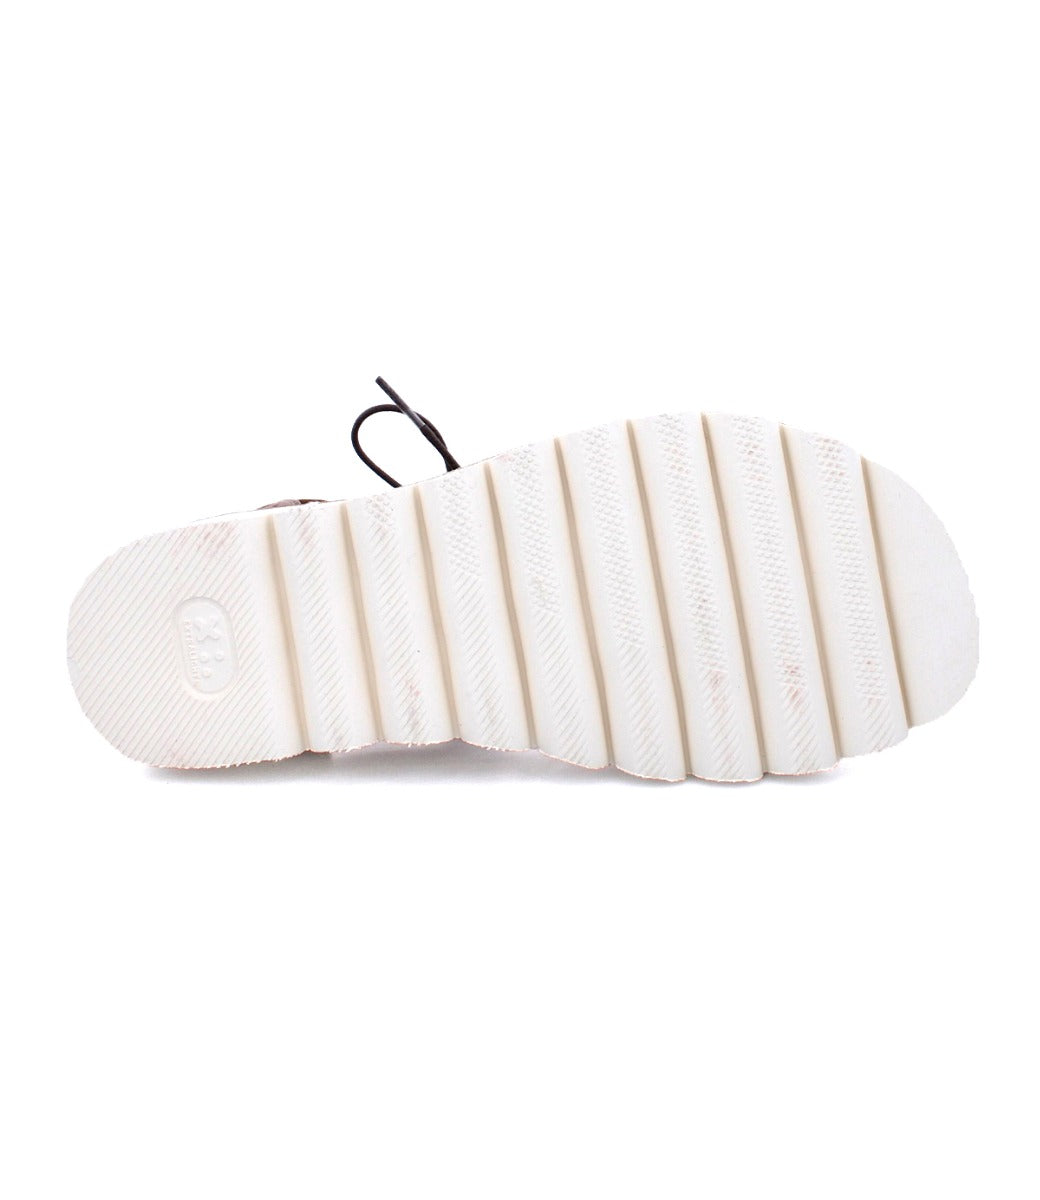 A pair of Bed Stu Shirin II sandals with a white sole.